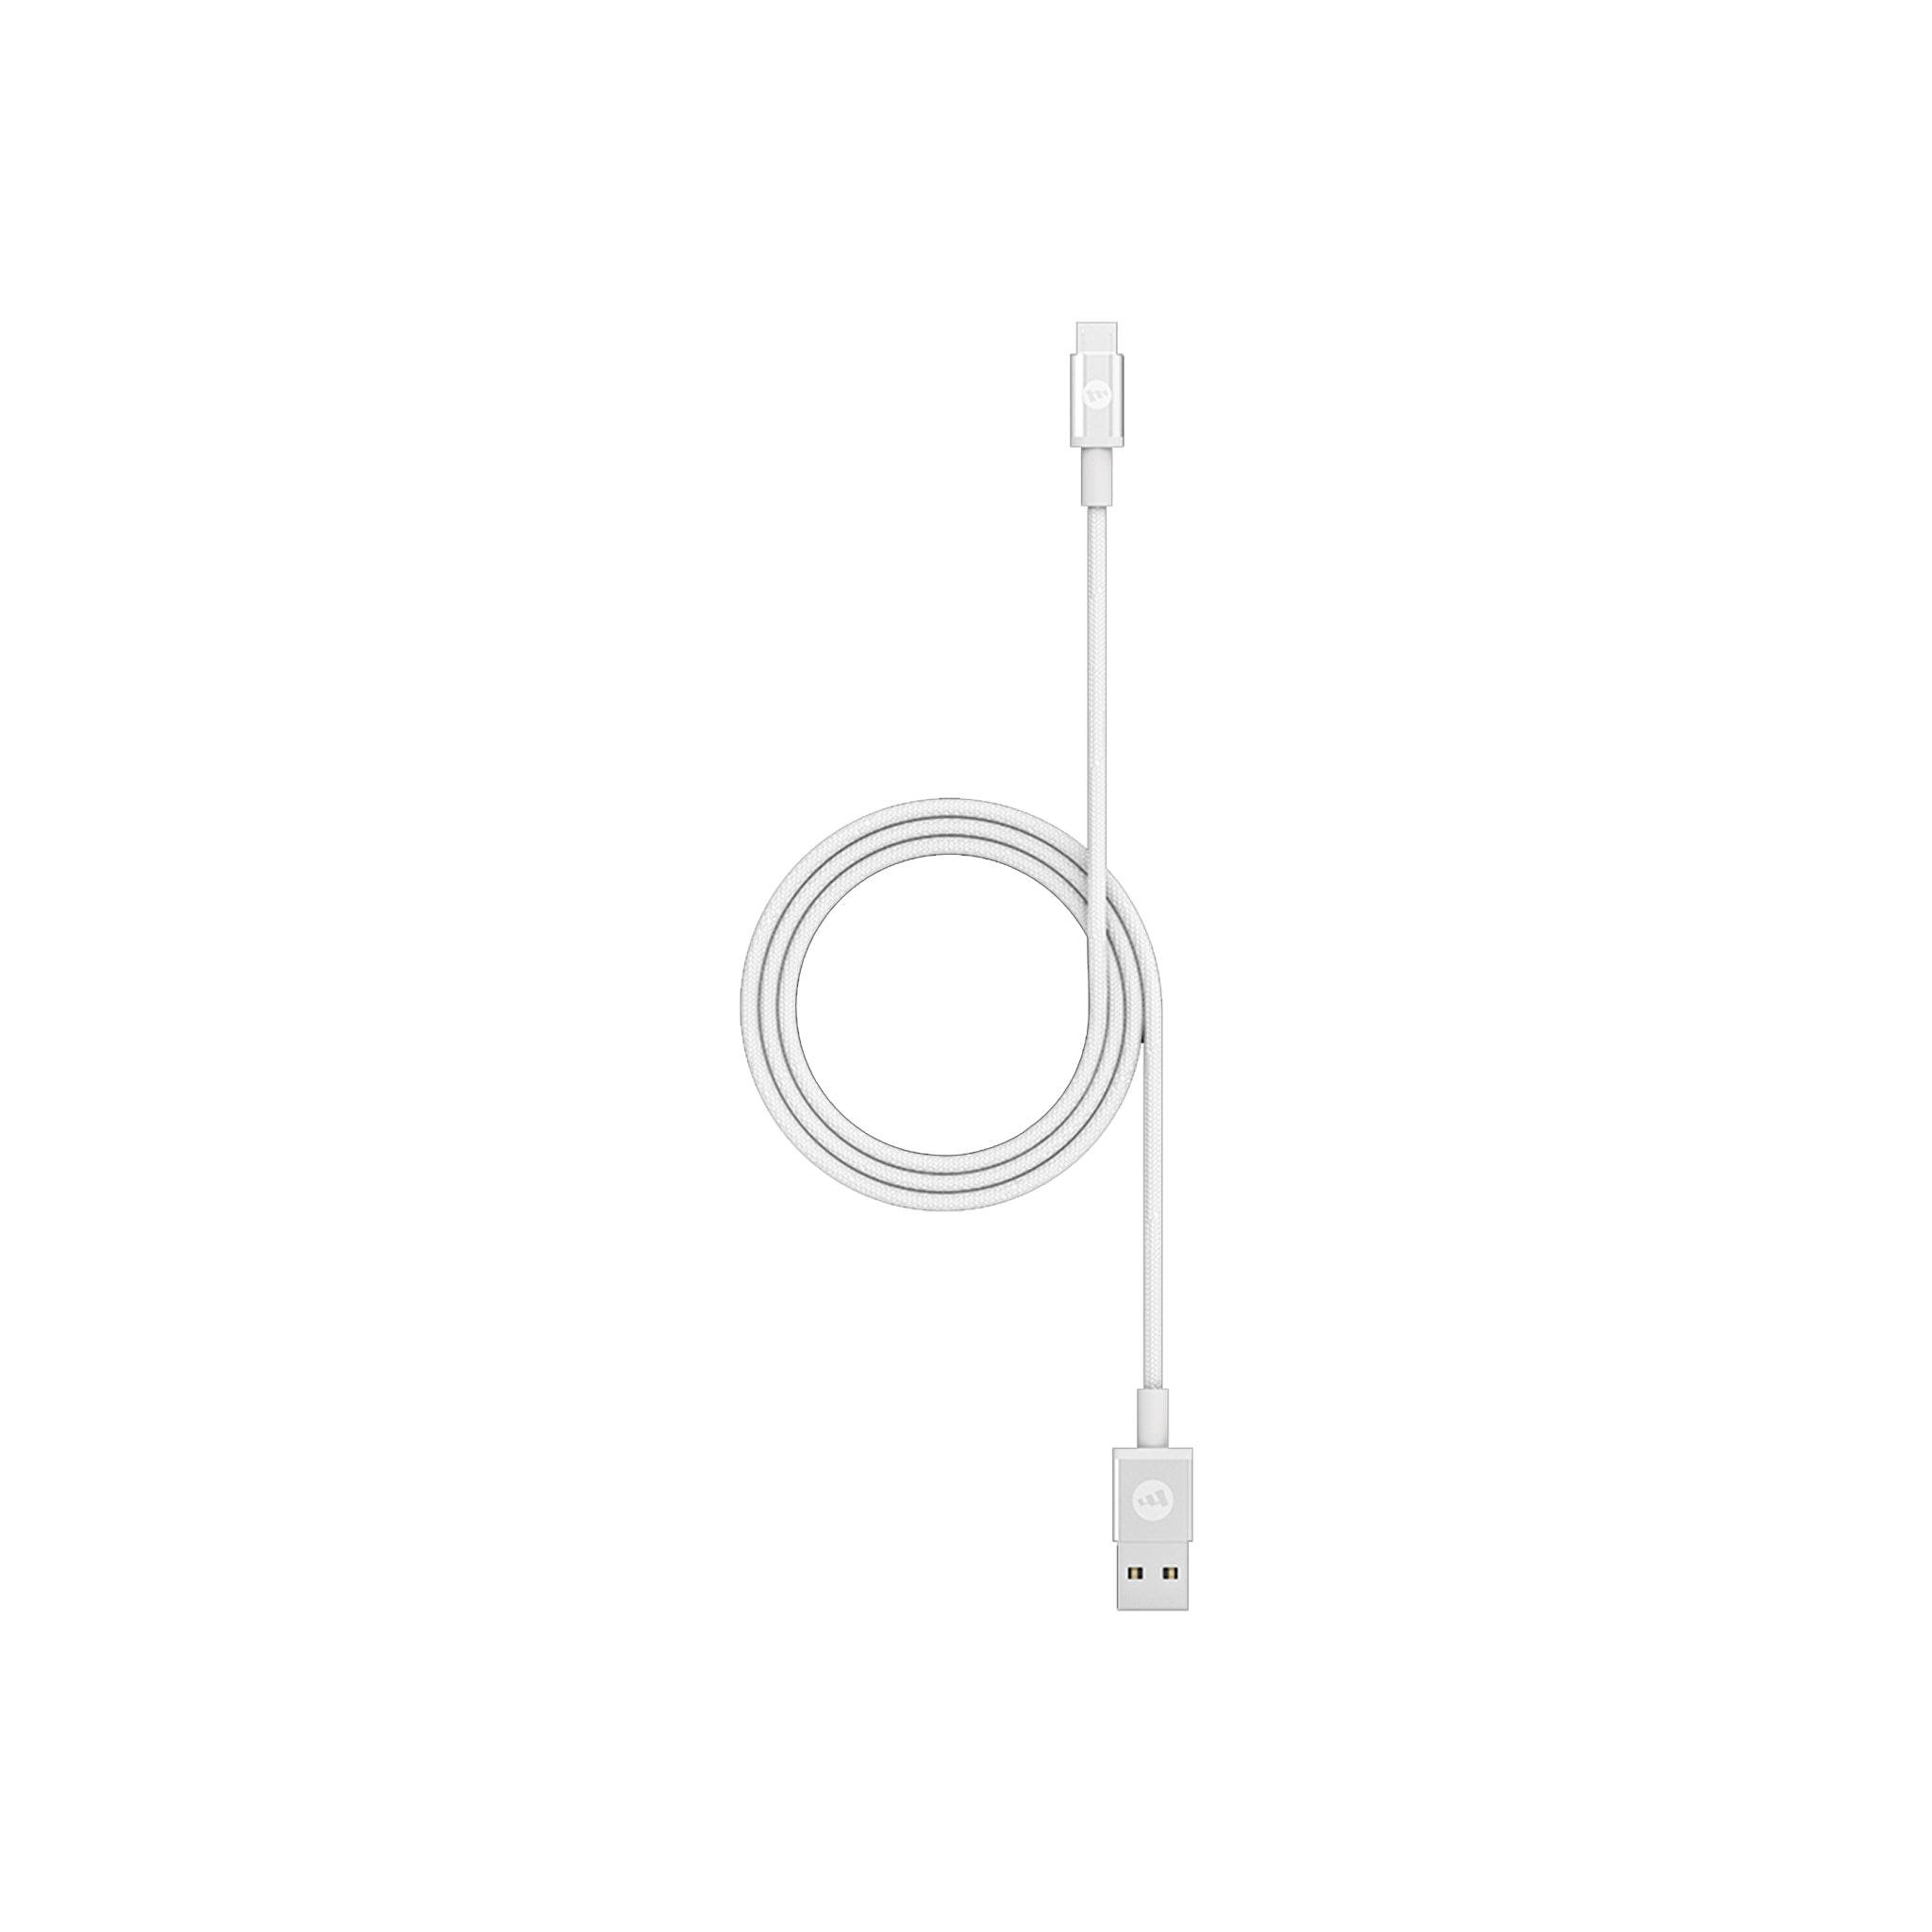 Mophie - Micro Usb Cable 3ft - White